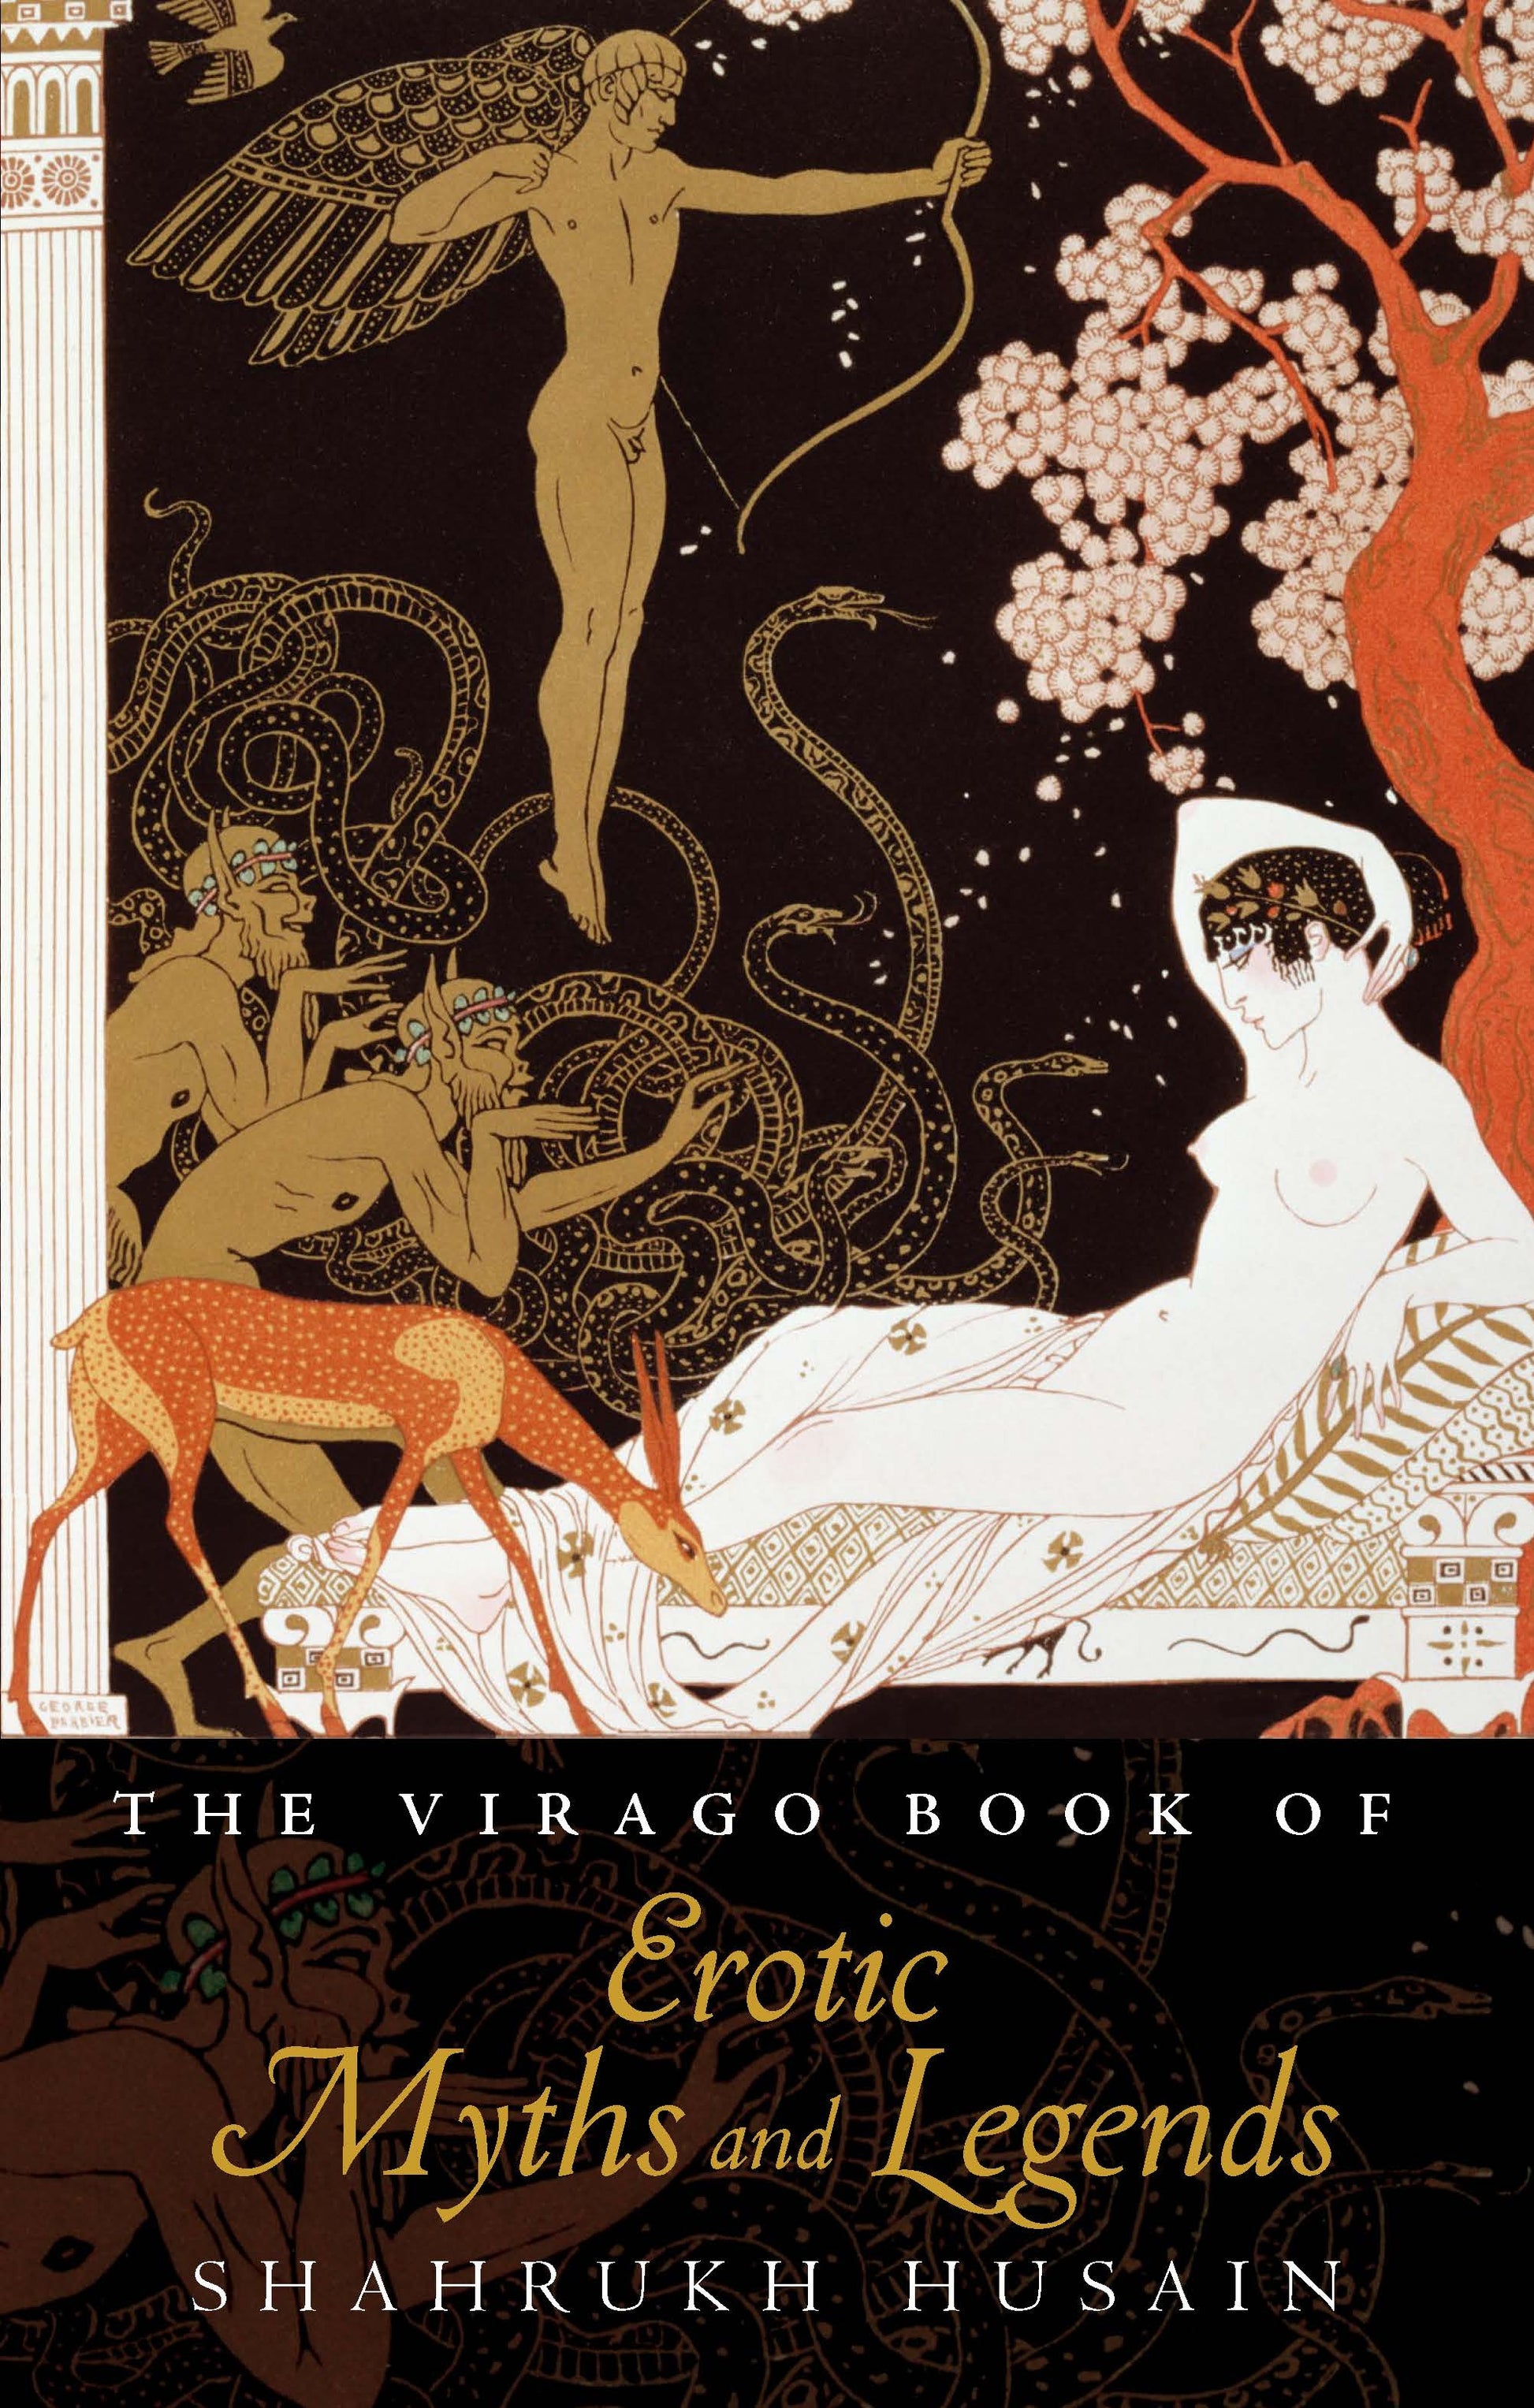 The Virago Book Of Erotic Myths And Legends by Shahrukh Husain